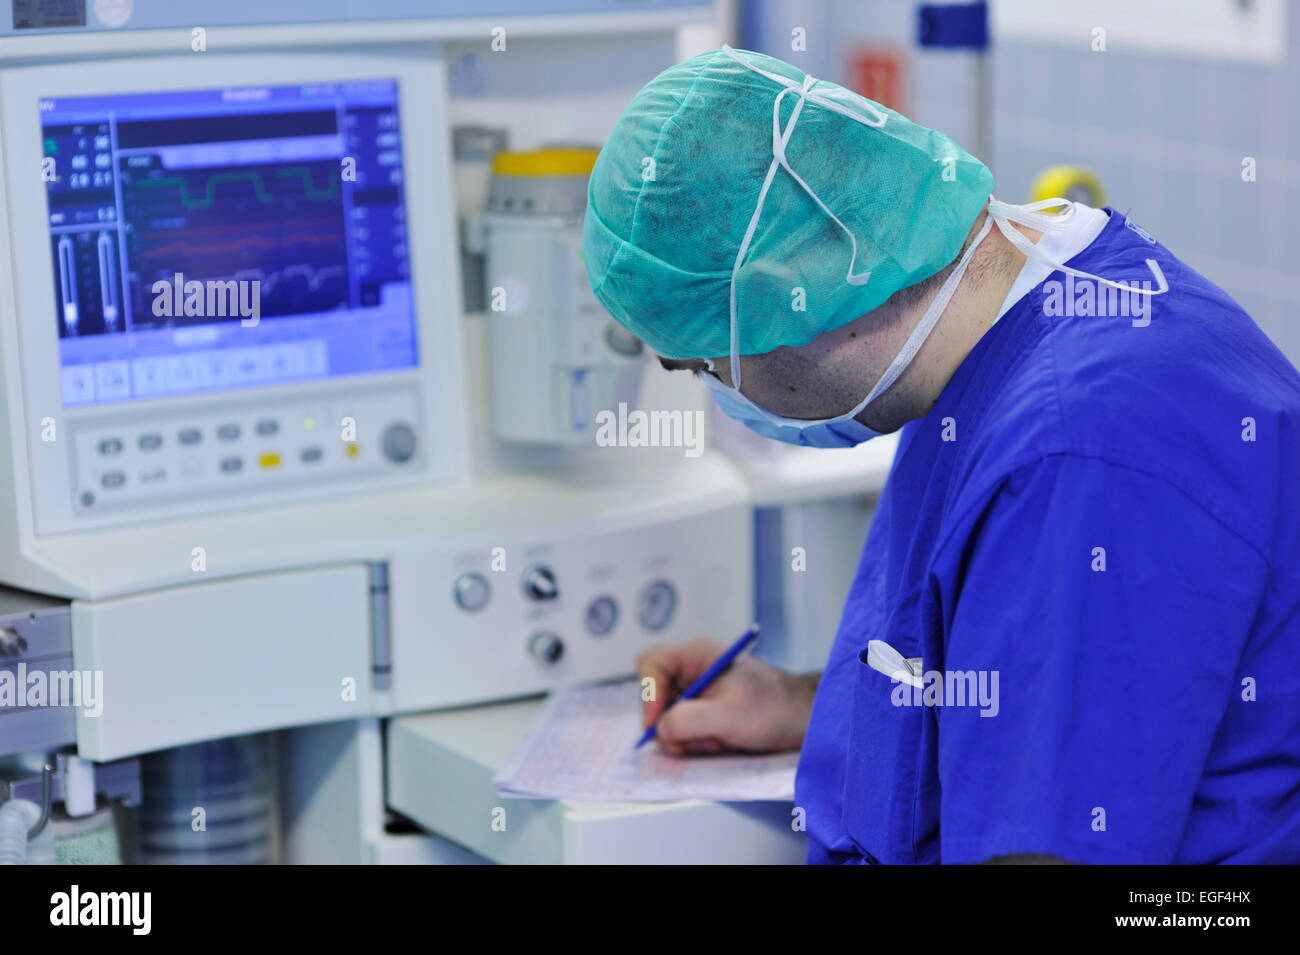 medical skills, craftsmanship and a high level of high-tech co-operate to a patient like this on a Sauerland clinic connected to Stock Photo